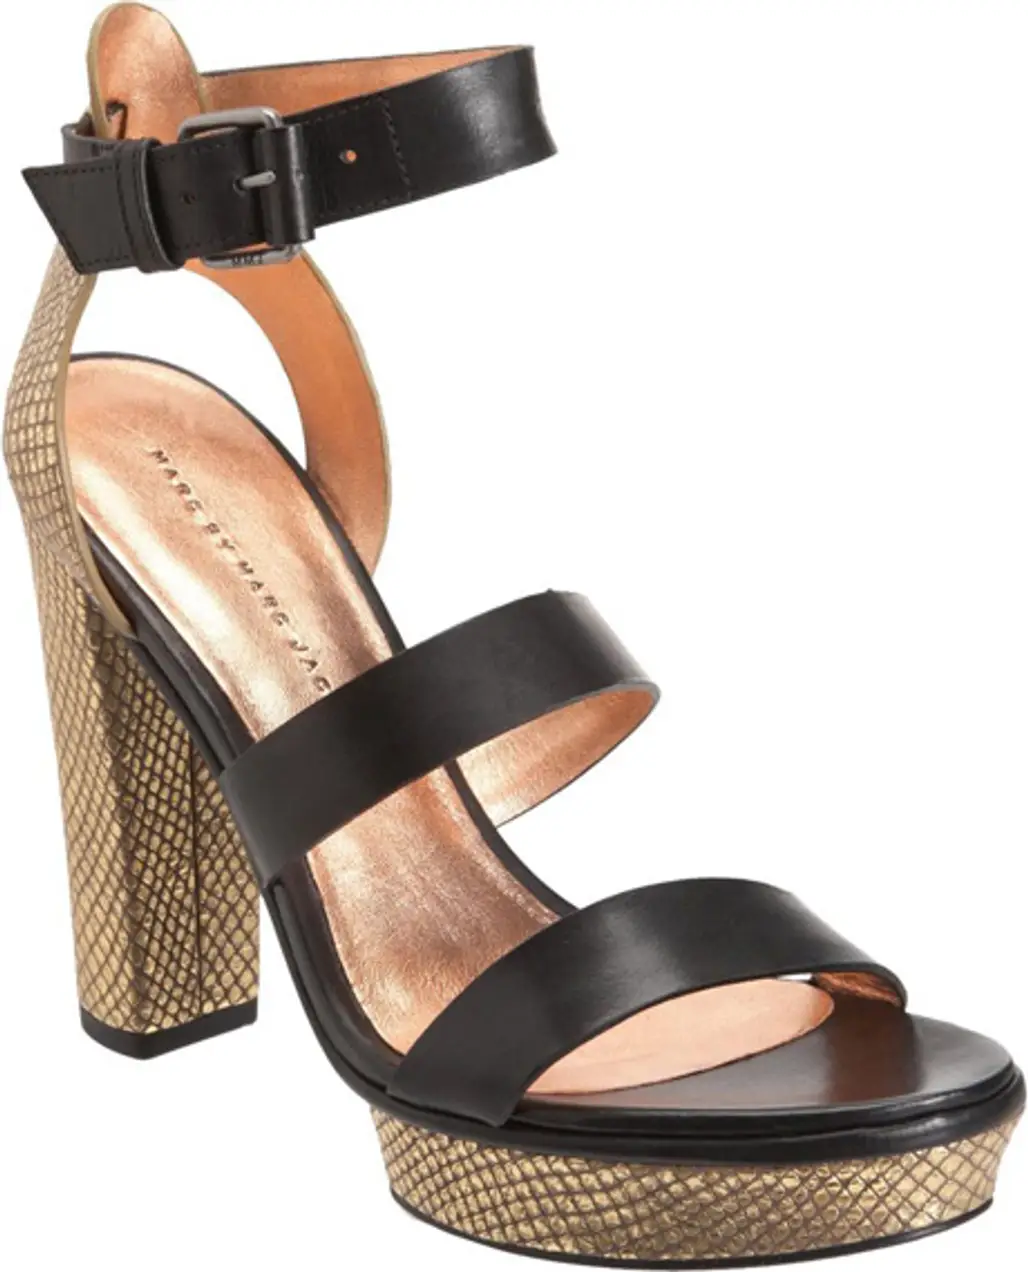 Marc by Marc Jacobs Sandal